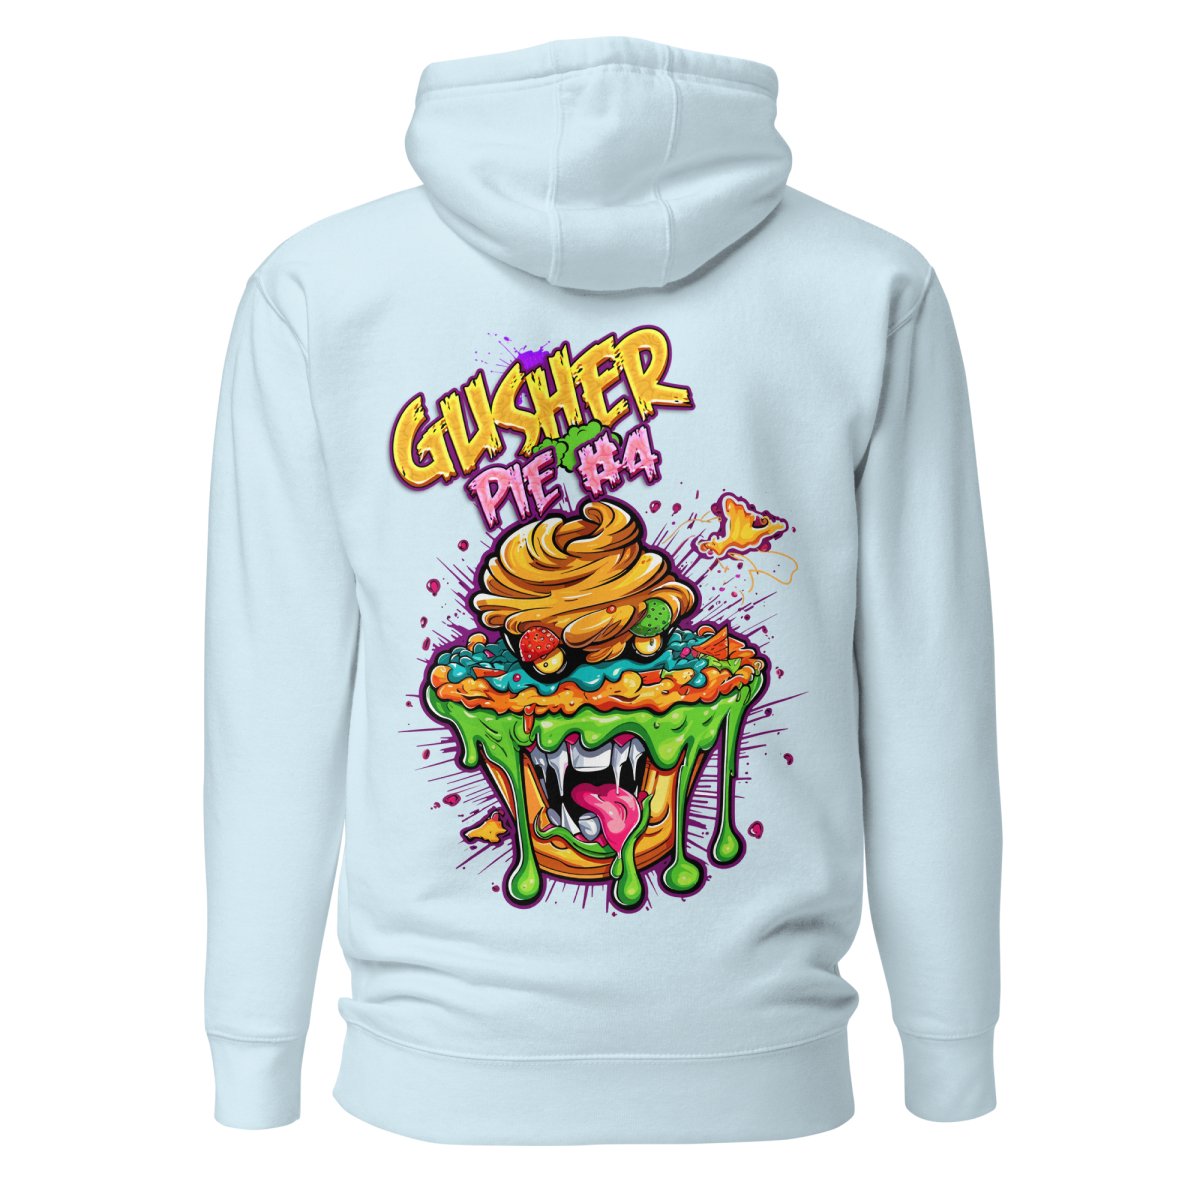 Gusher Pie #4 Hoodie - Mainly High